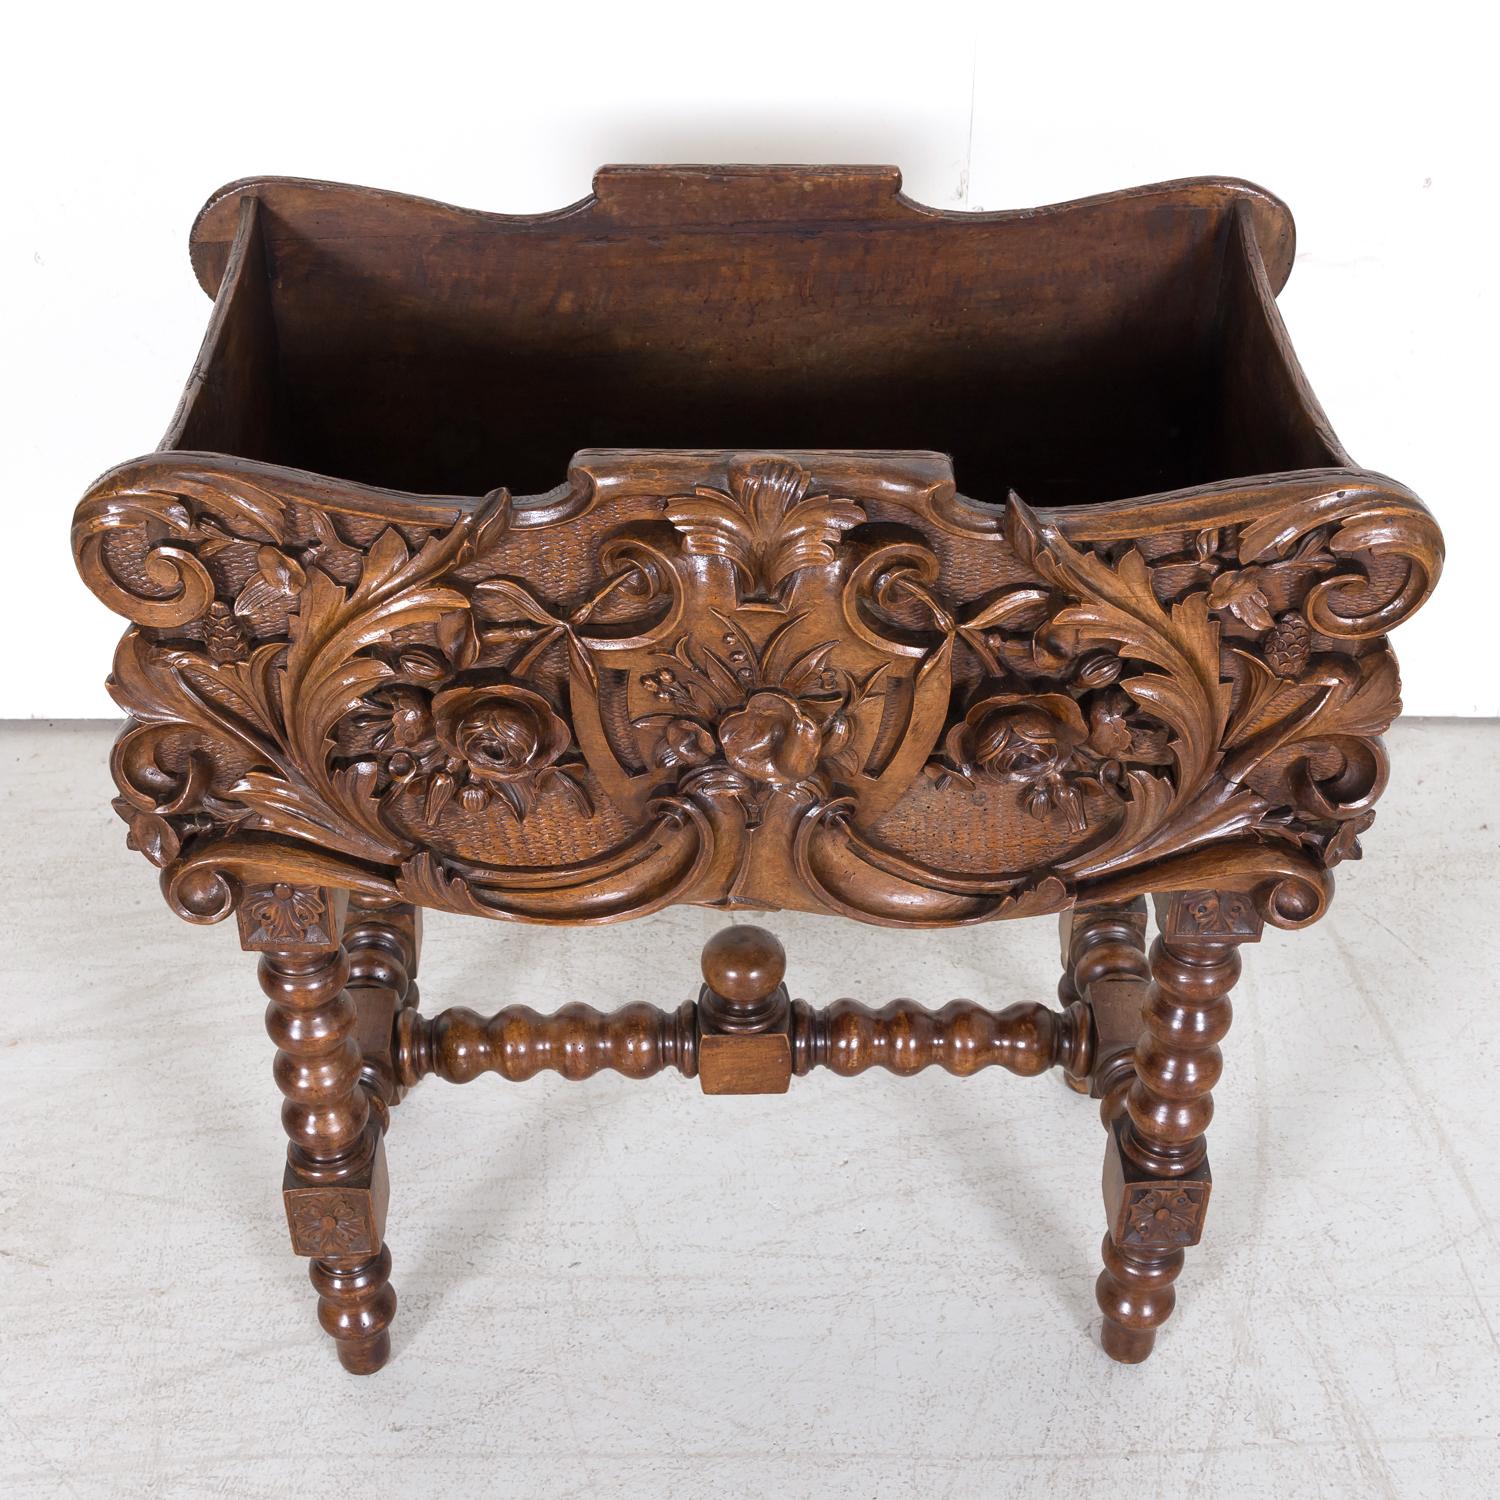 19th Century French Hand Carved Walnut Black Forest Jardiniére or Planter For Sale 1